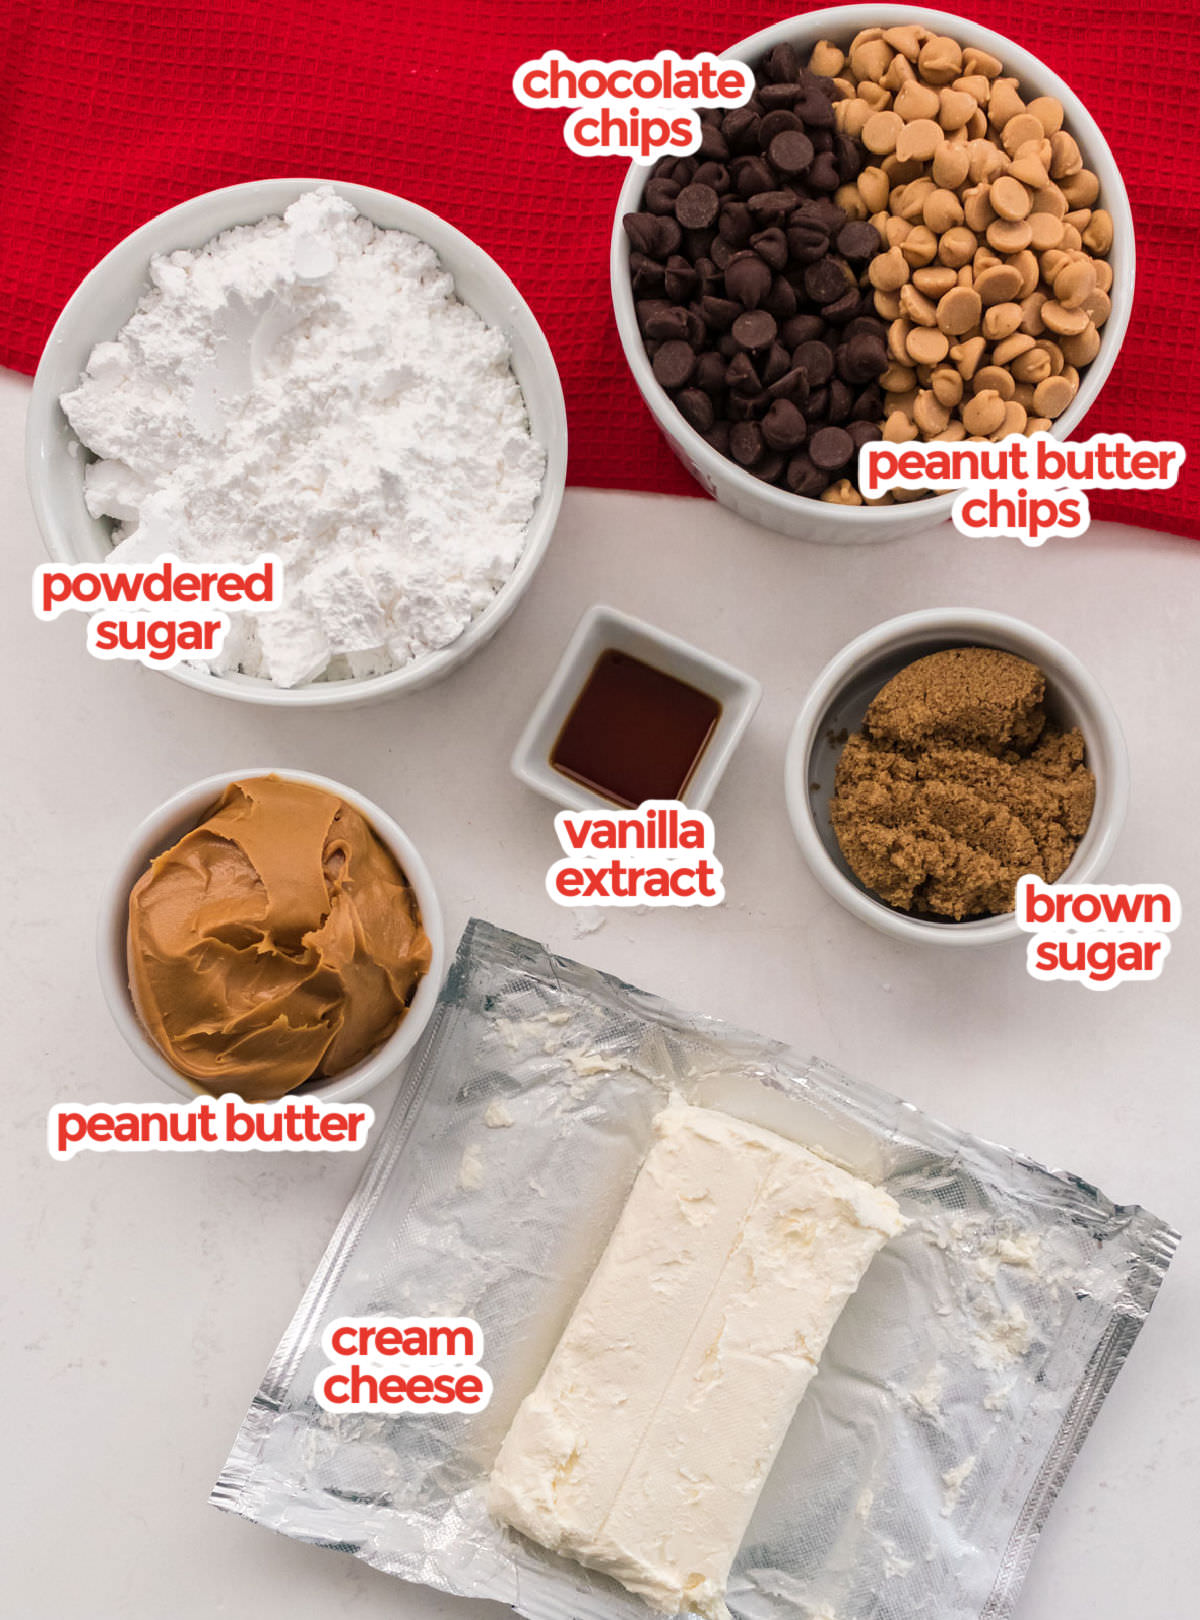 All the ingredients needed to make Peanut Butter Cheese Balls including cream cheese, powdered sugar, peanut butter, vanilla, chocolate chips and peanut butter chips.